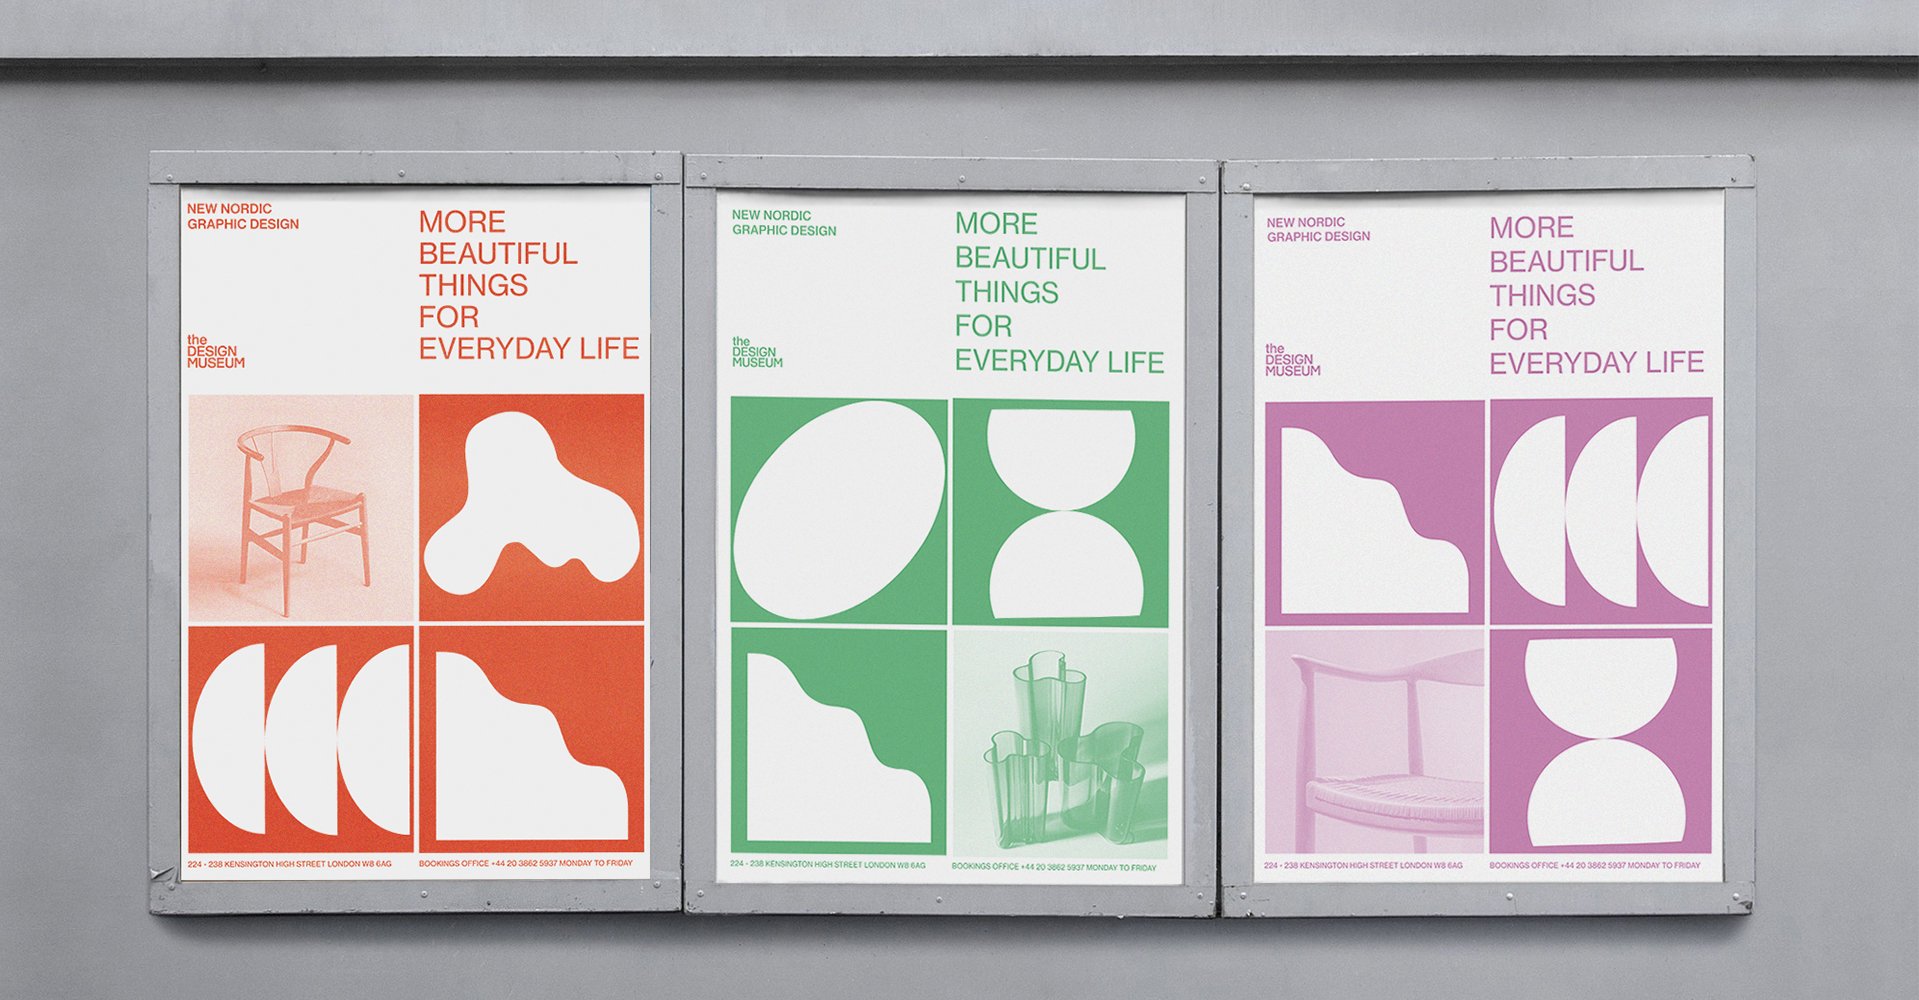 More beautiful things for everyday life / Exhibition Identity / Urban Poster Campaign